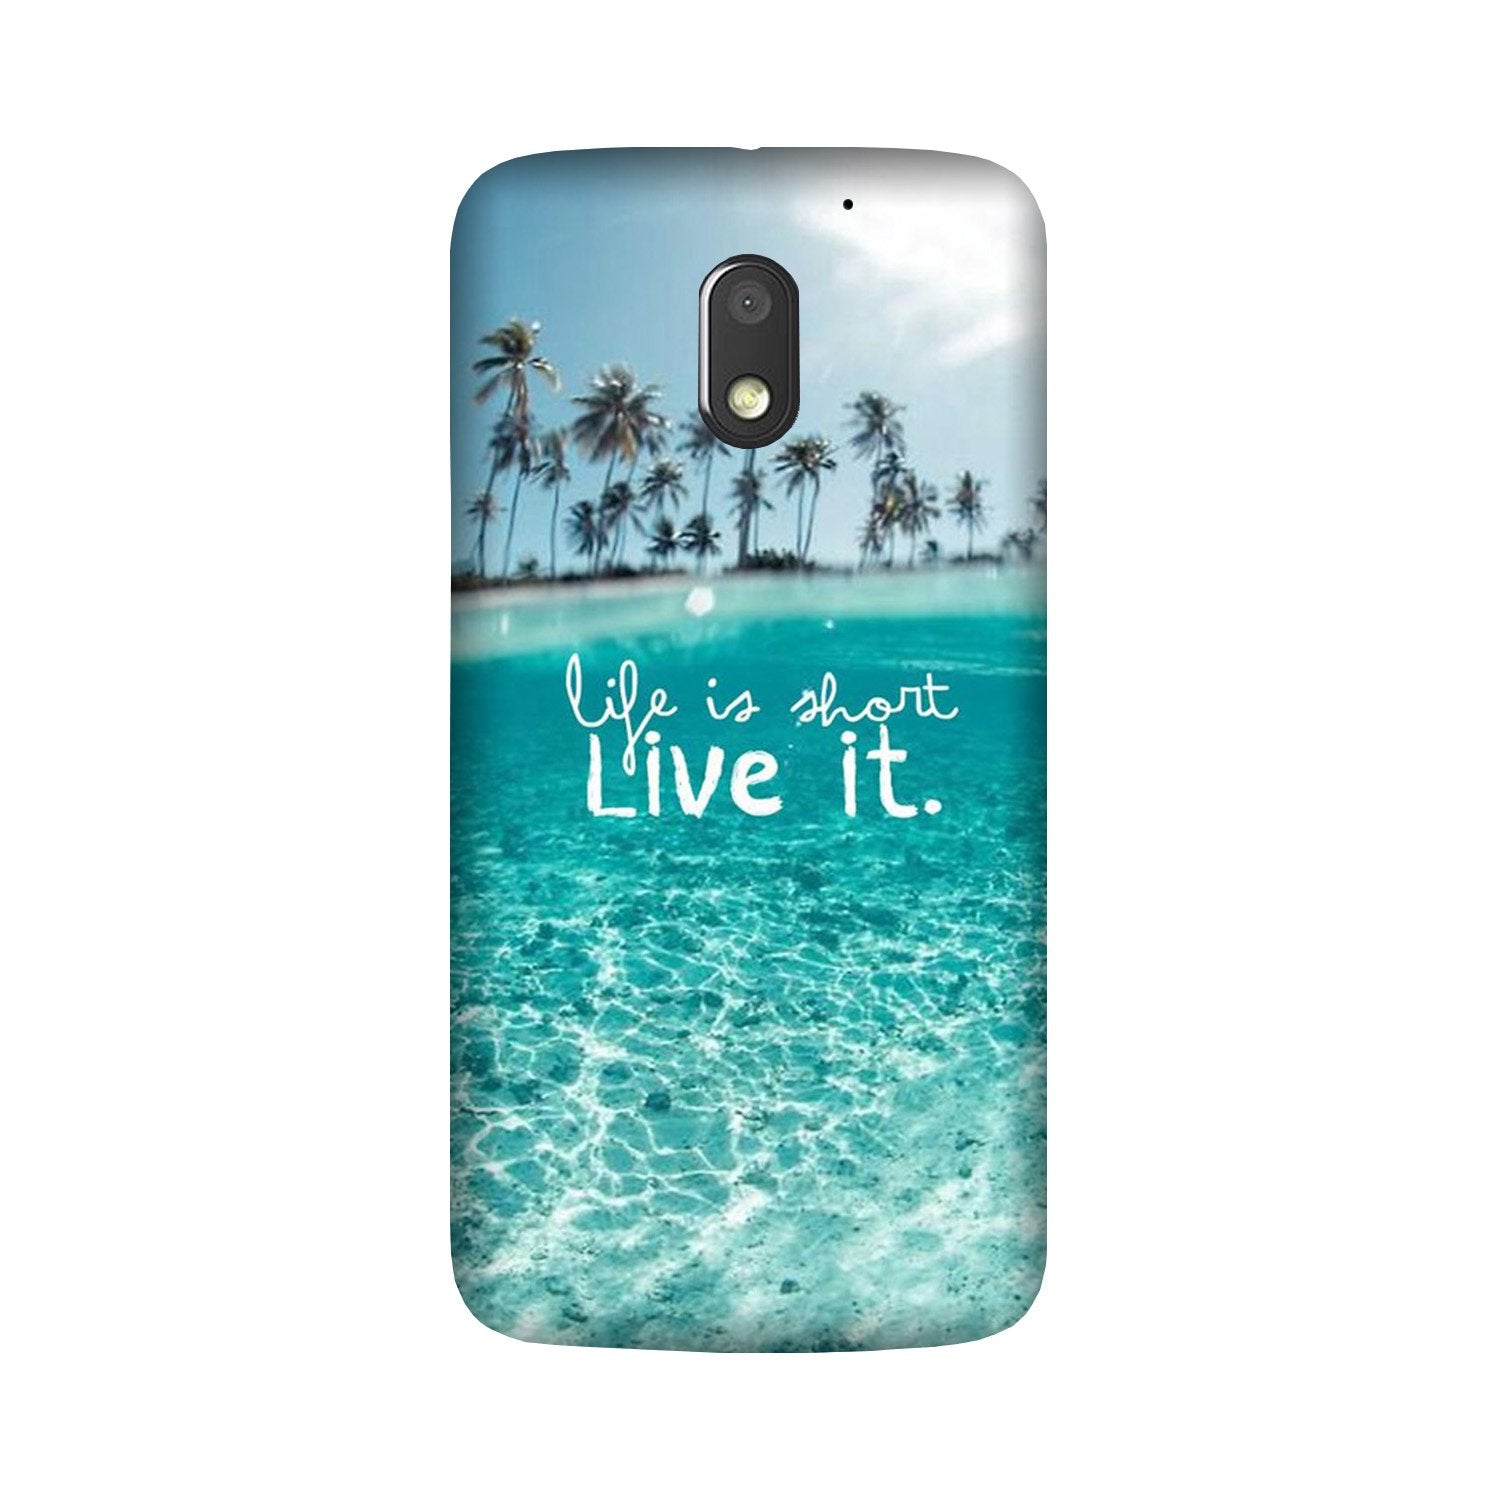 Life is short live it Case for Moto G4 Play